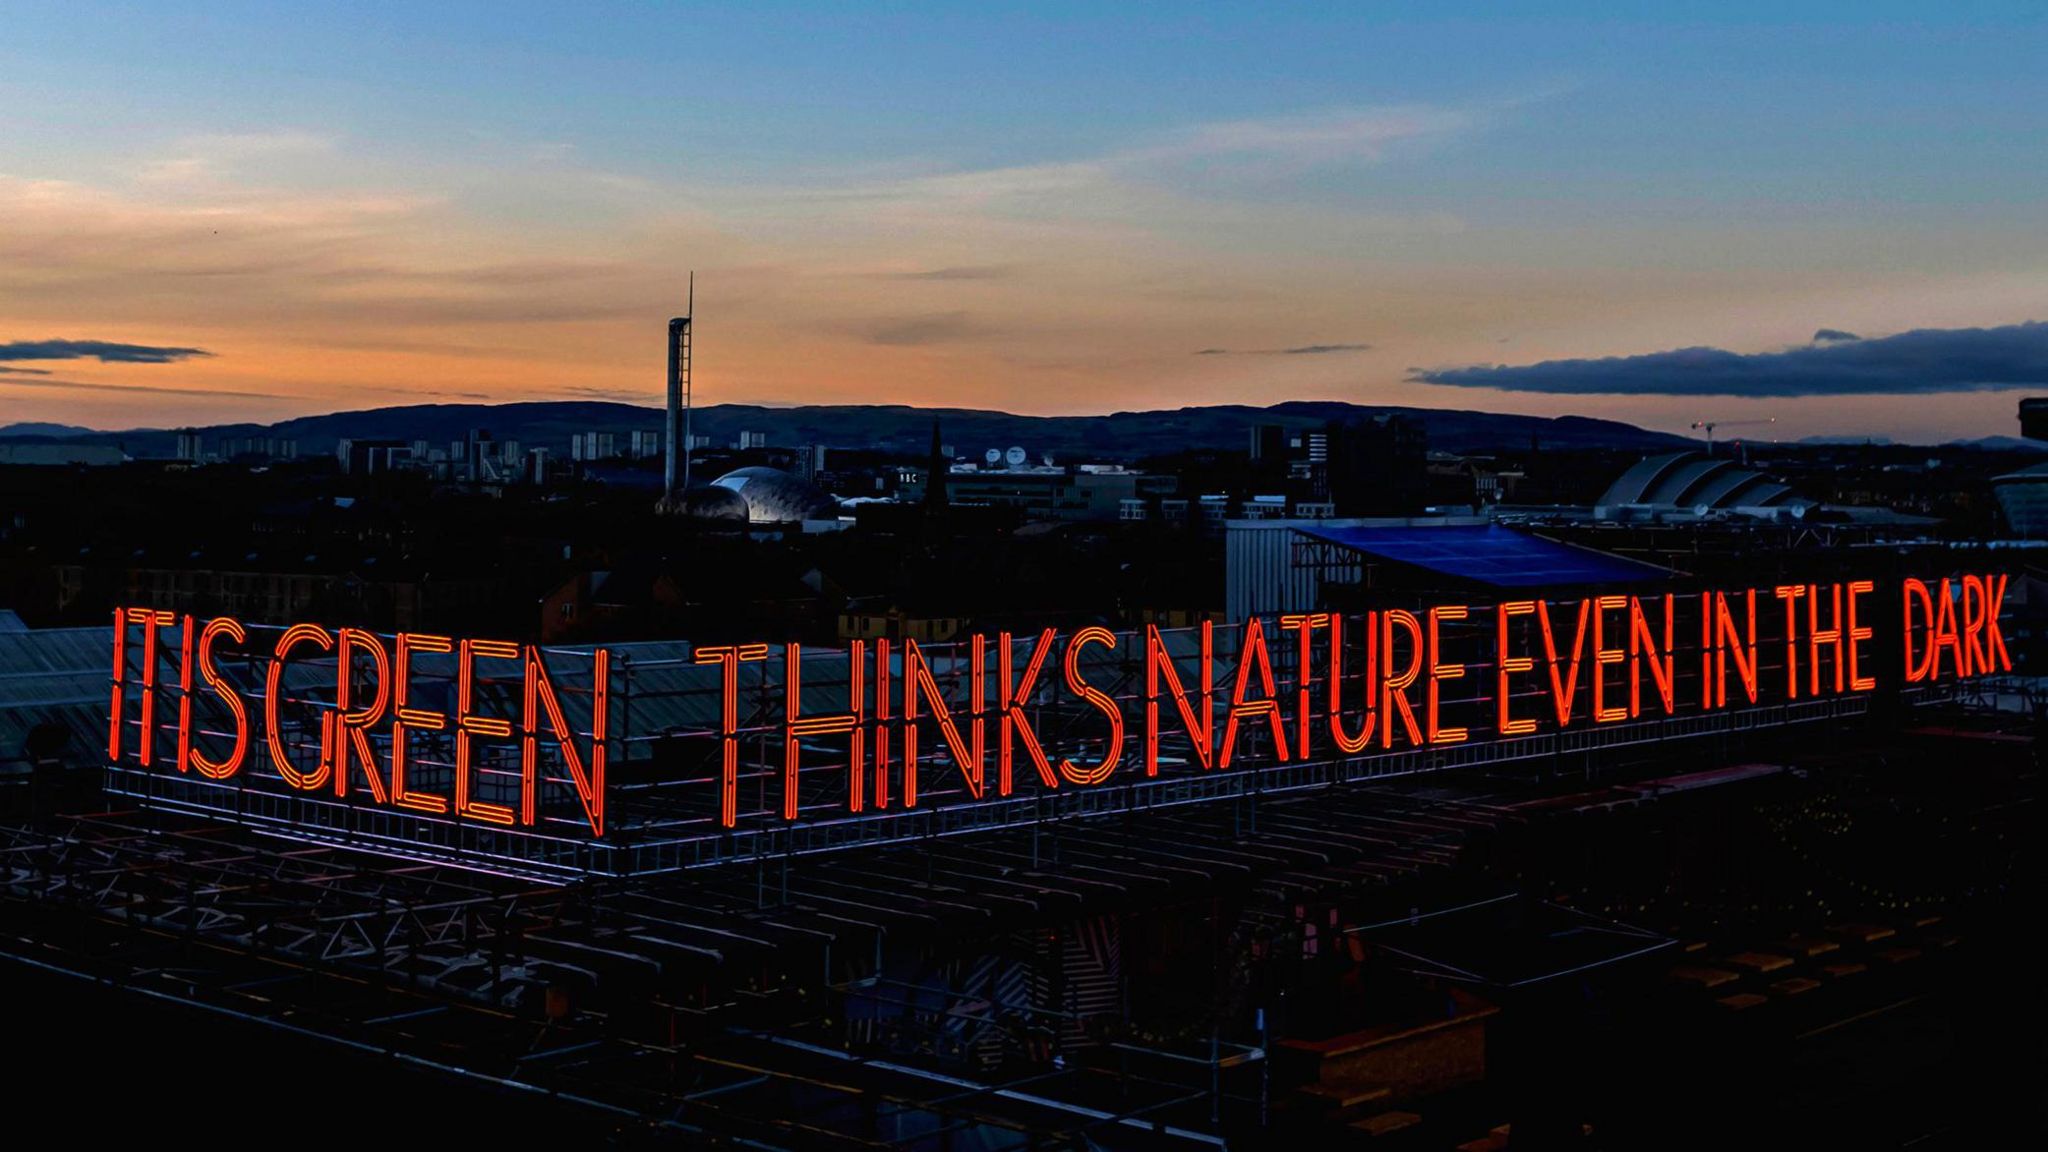 A photo of the neon sign reading "IT IS GREEN THINKS NATURE EVEN IN THE DARK" with a sunset in the background